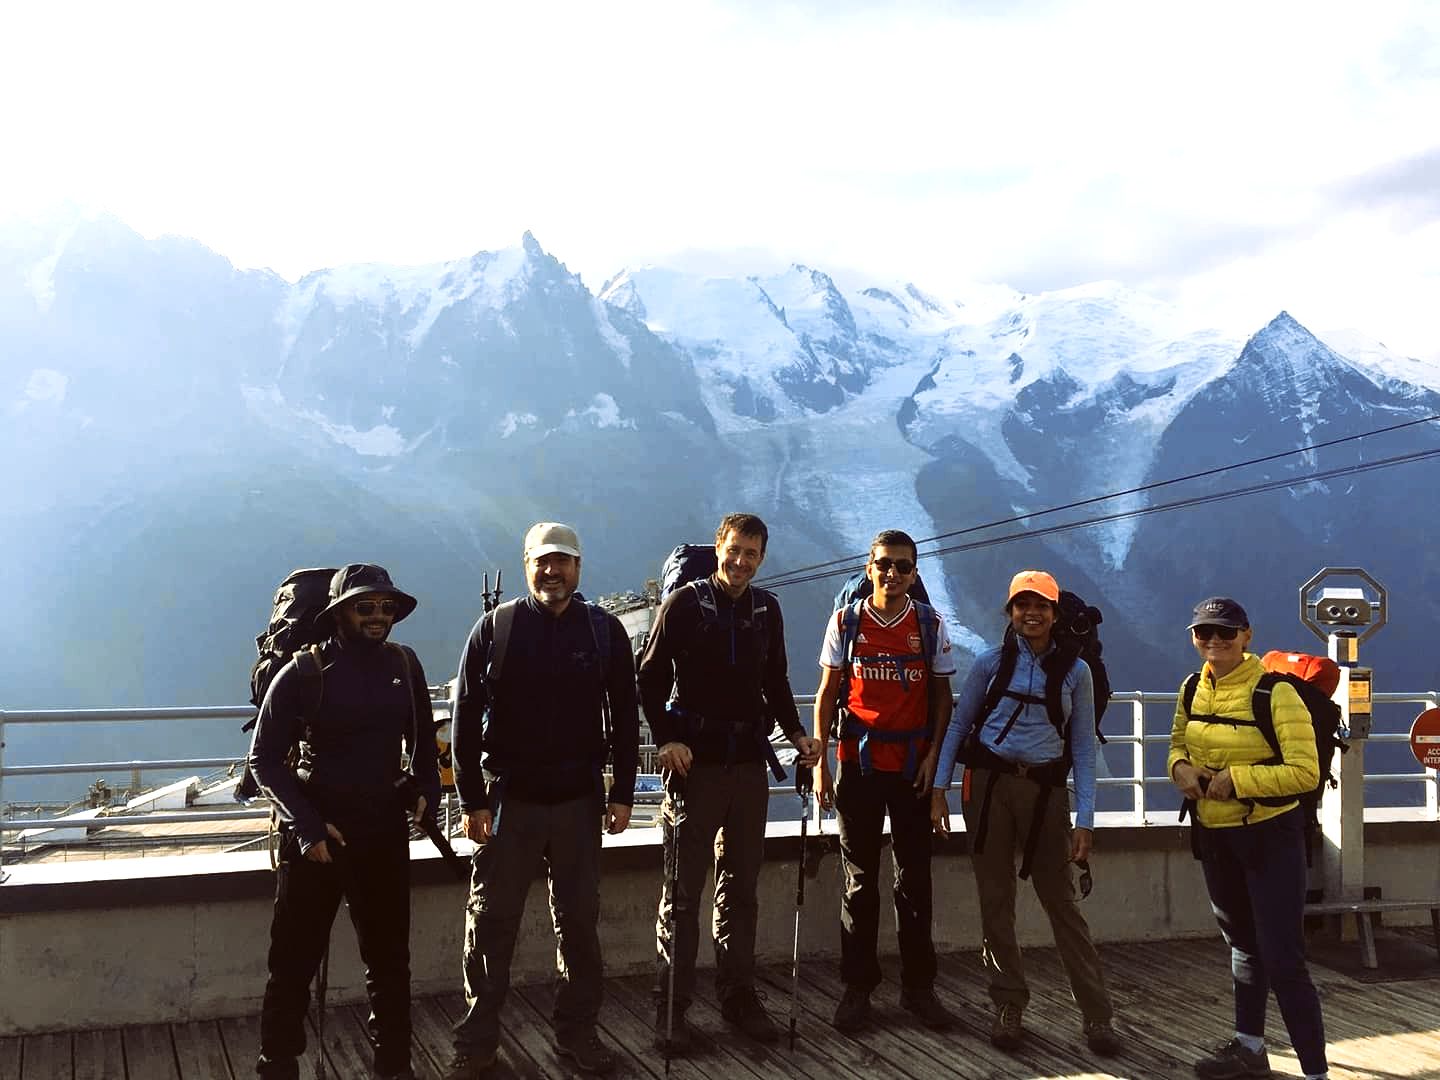 With my hiking group in the French Alps (3 of 4 guys in this photo were single!)